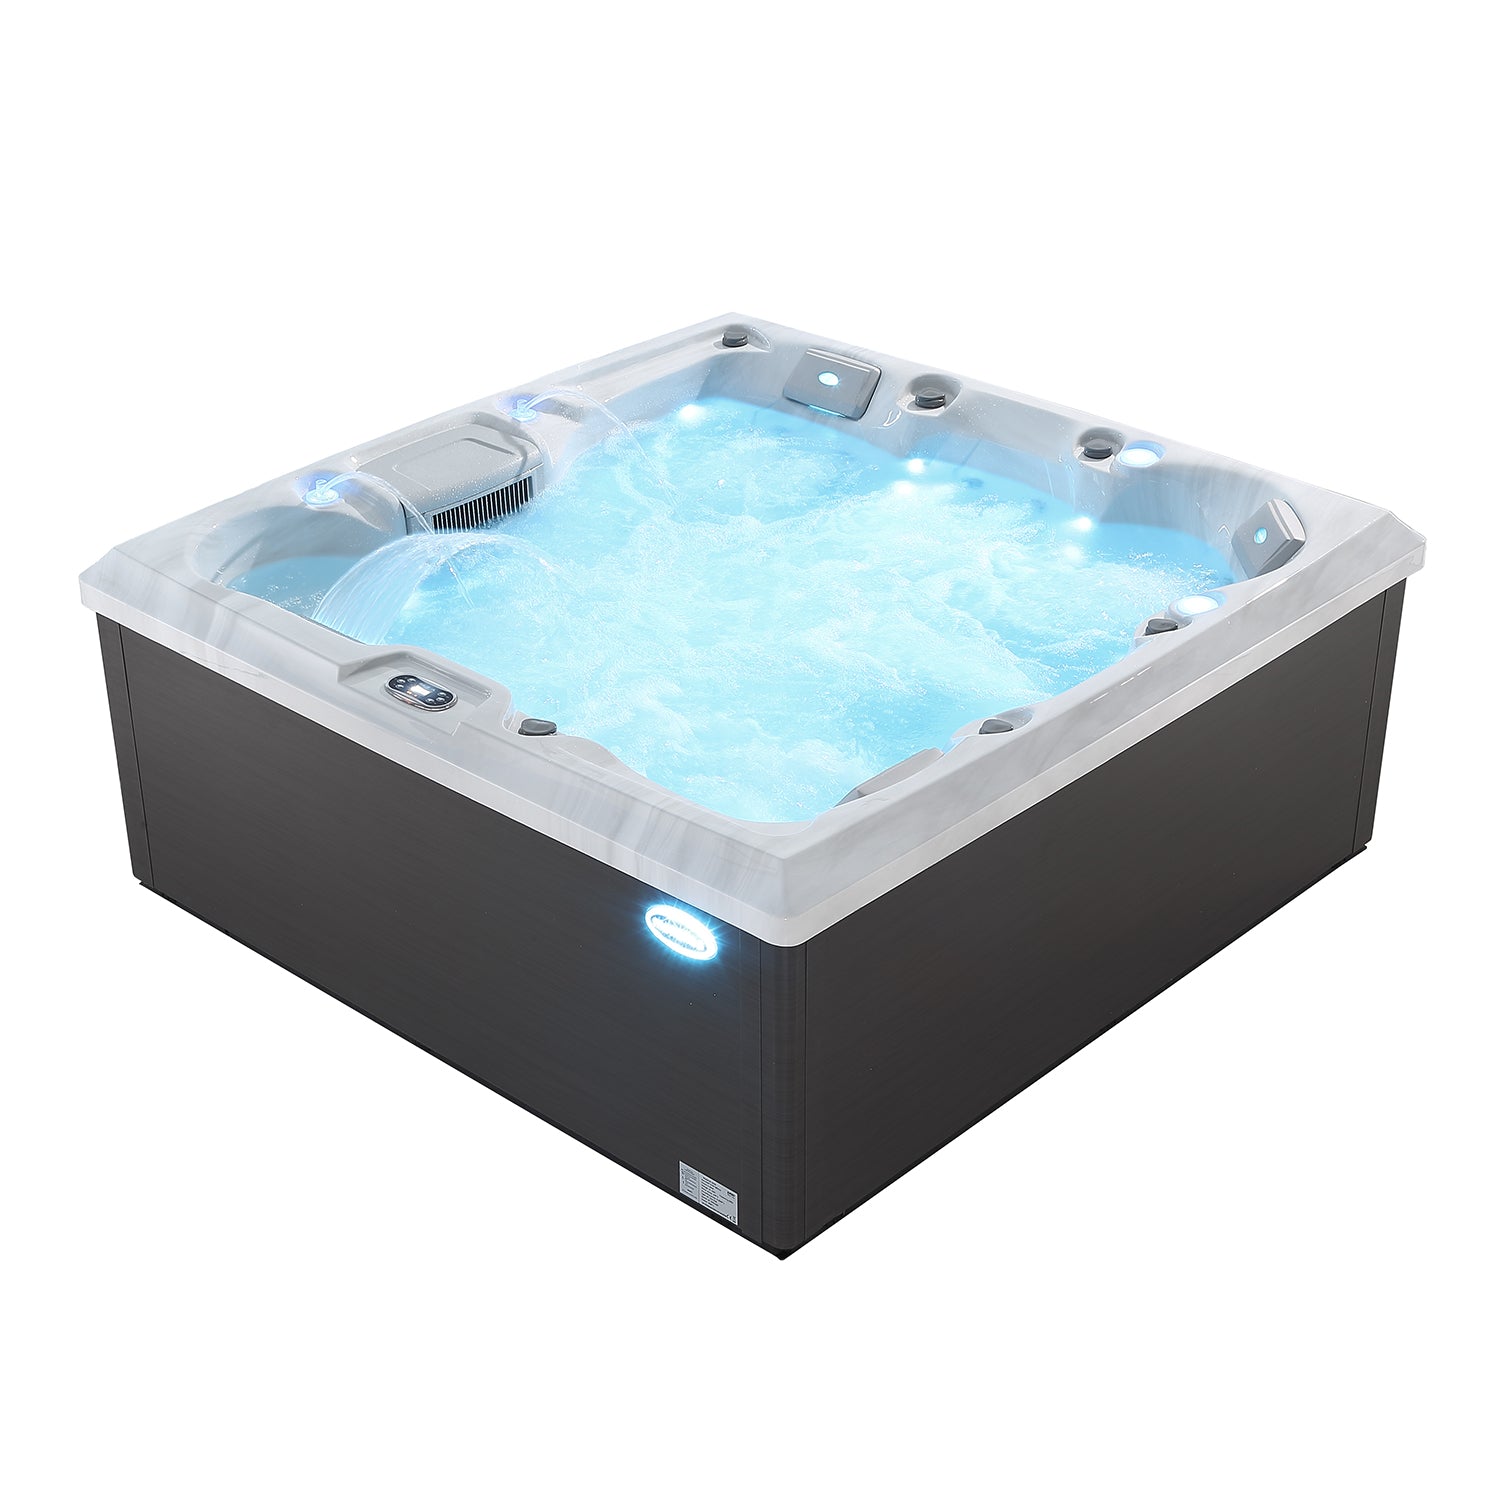 SPA3550 6-Person Whirlpool Outdoor Hot Tub-16